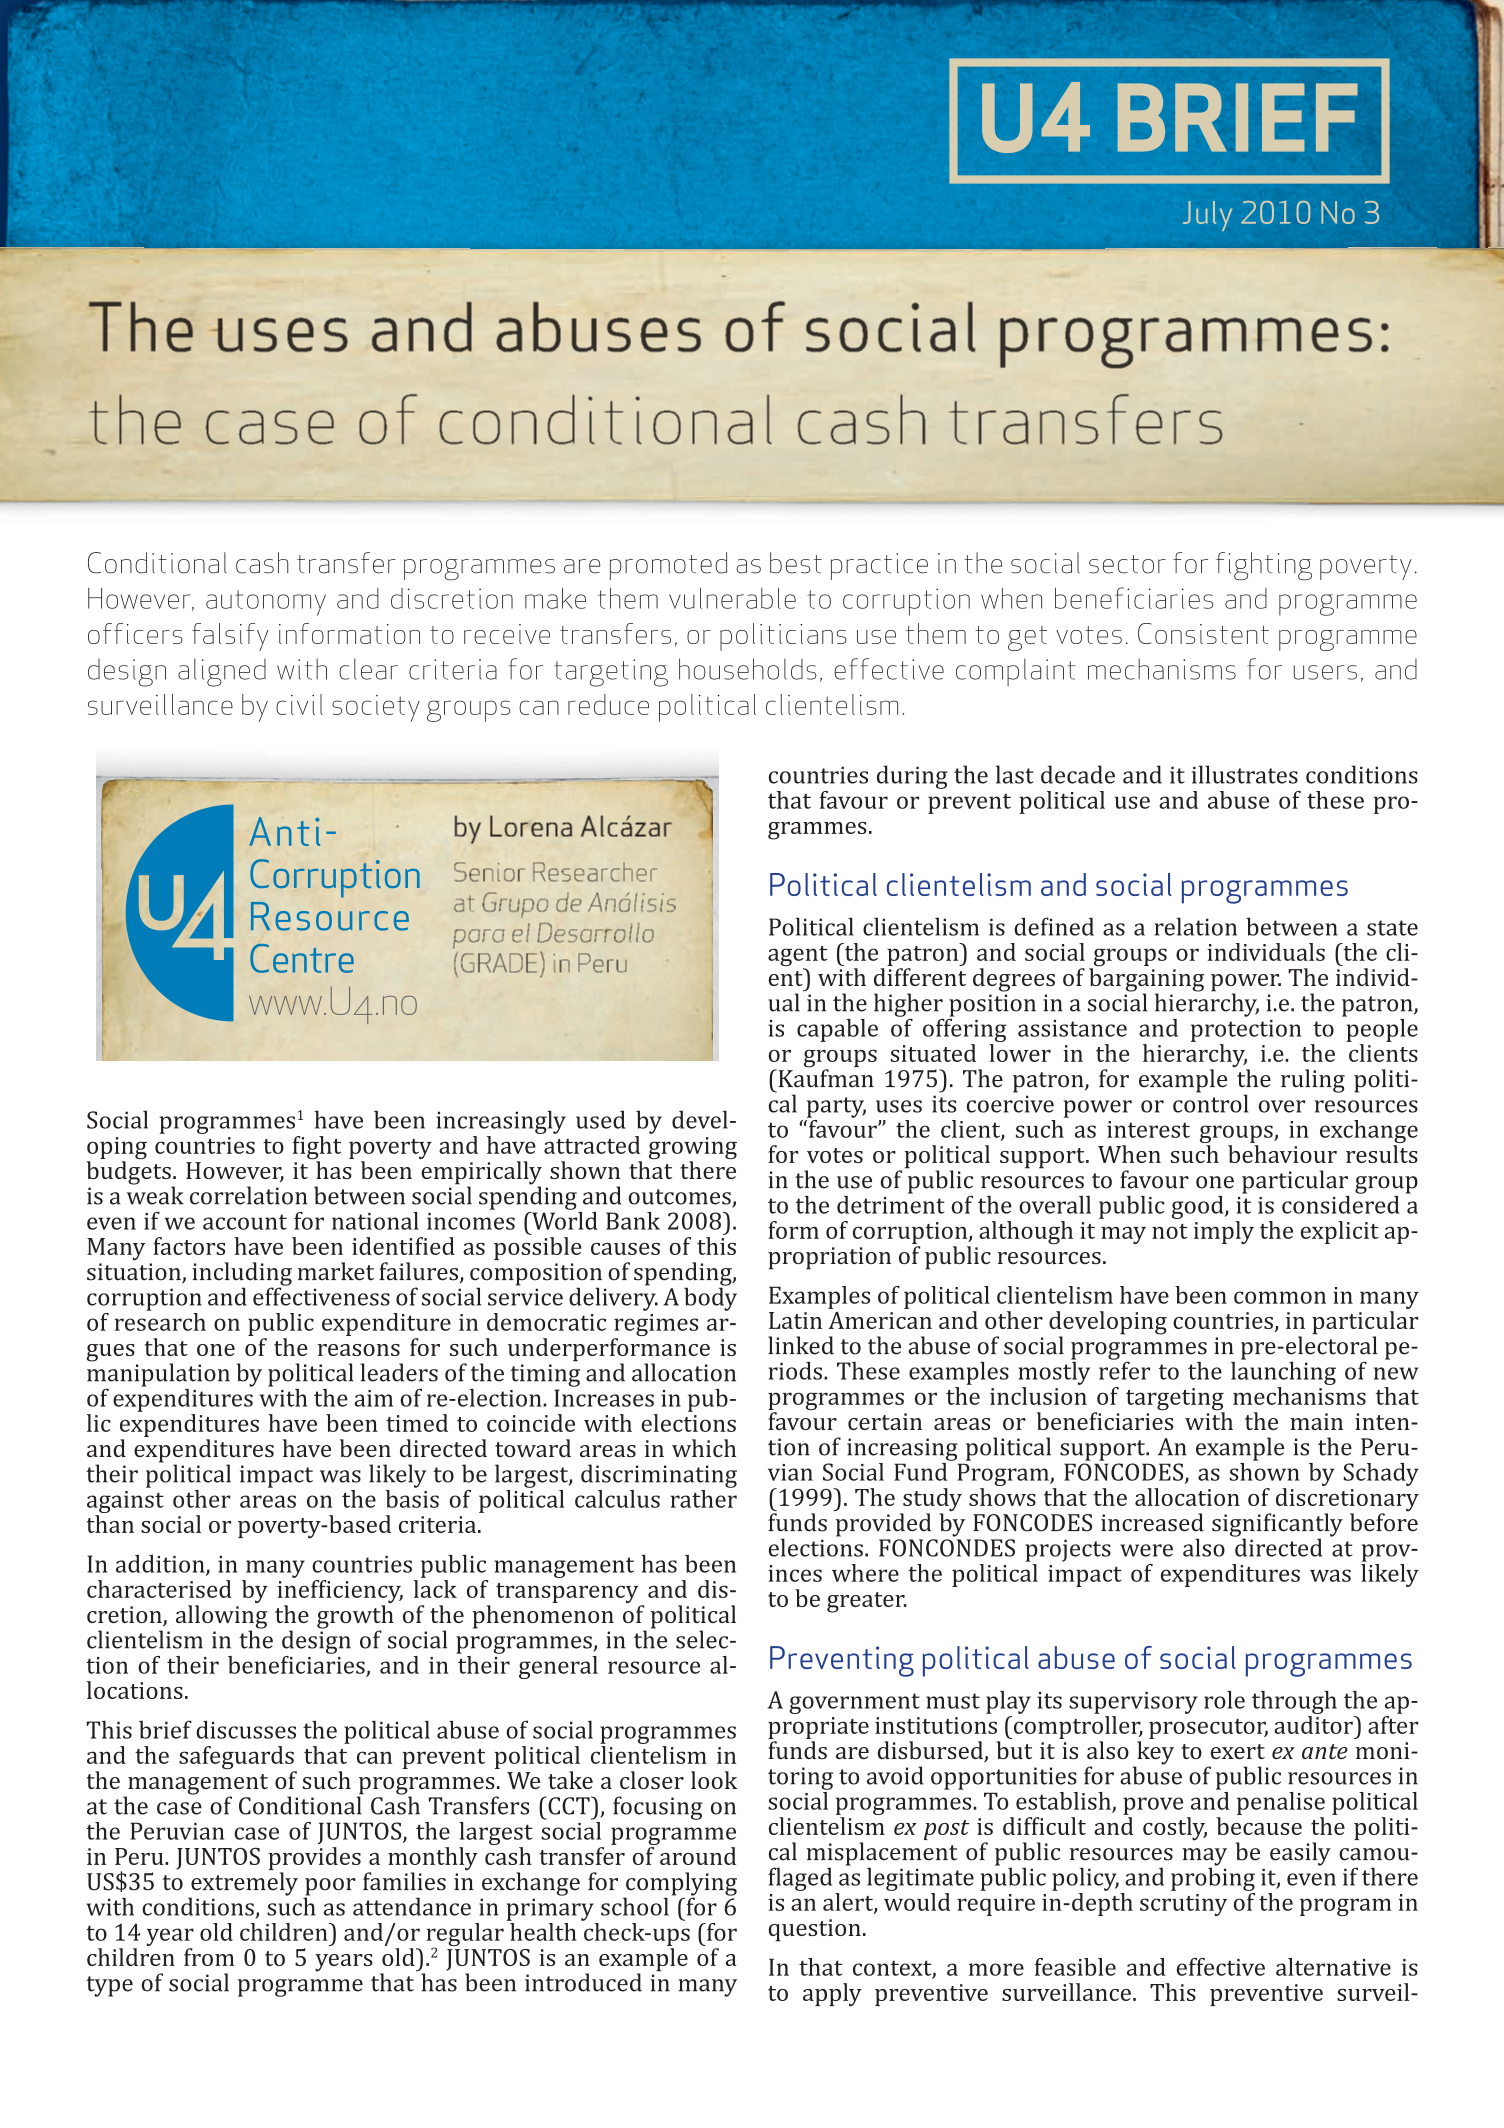 The uses and abuses of social programmes: the case of conditional cash transfers